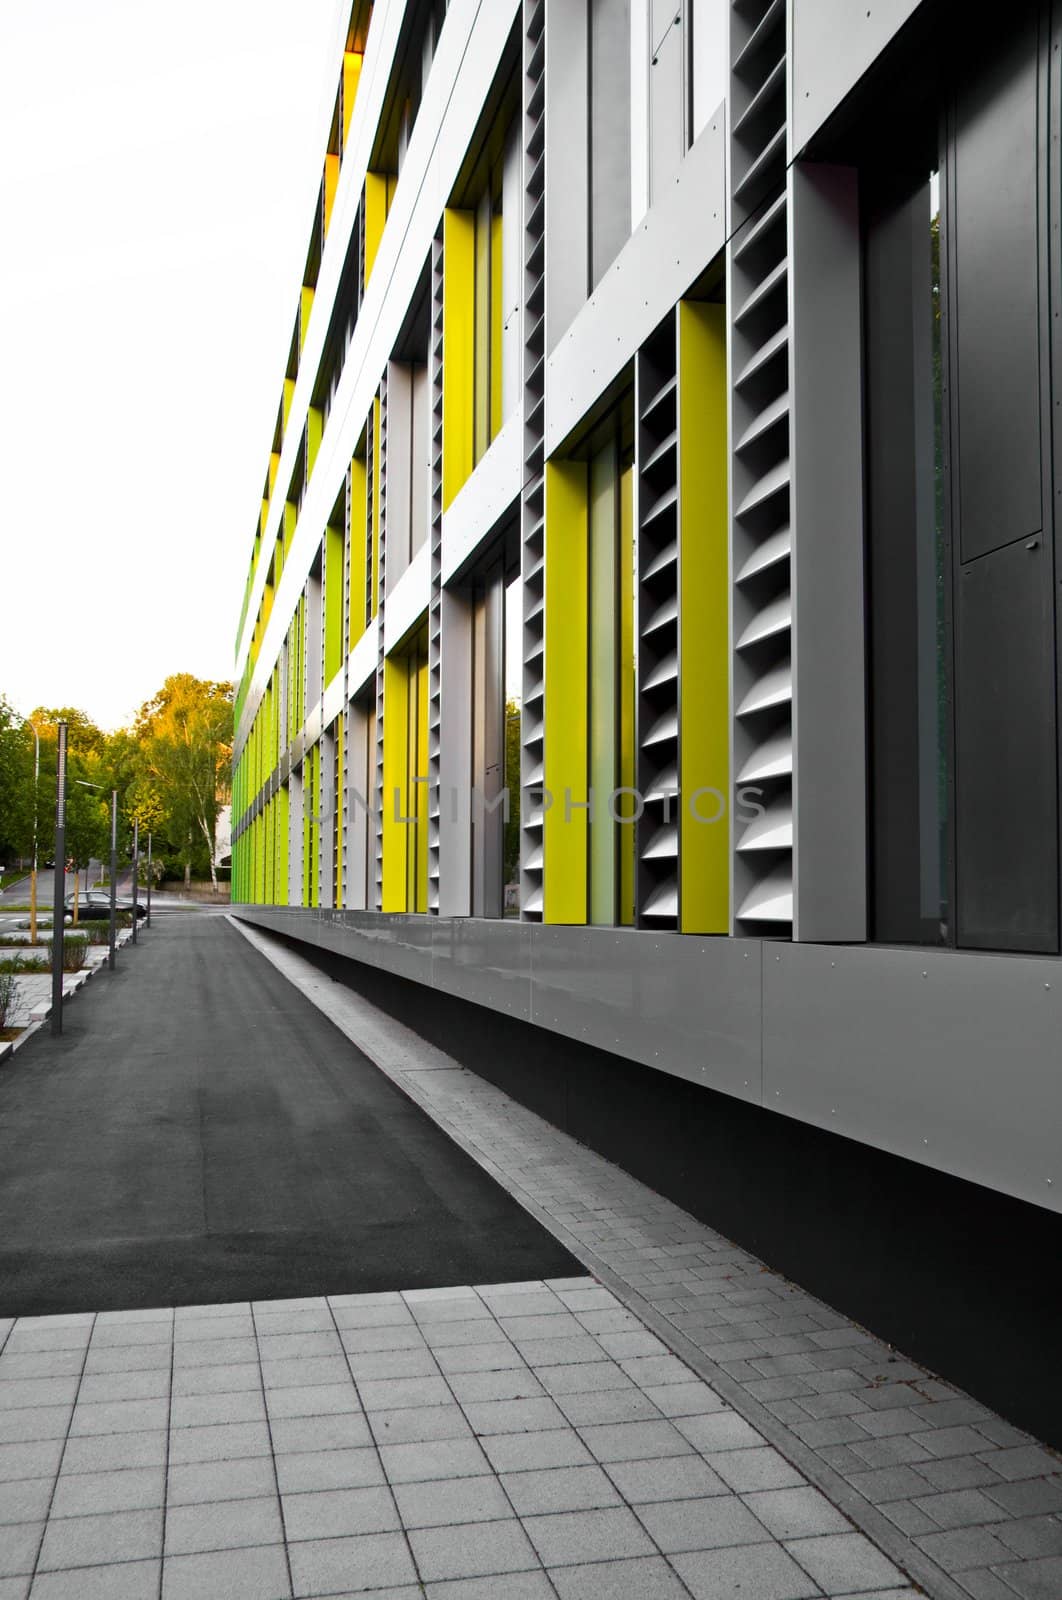 cladding on business building in grey, yellow and green